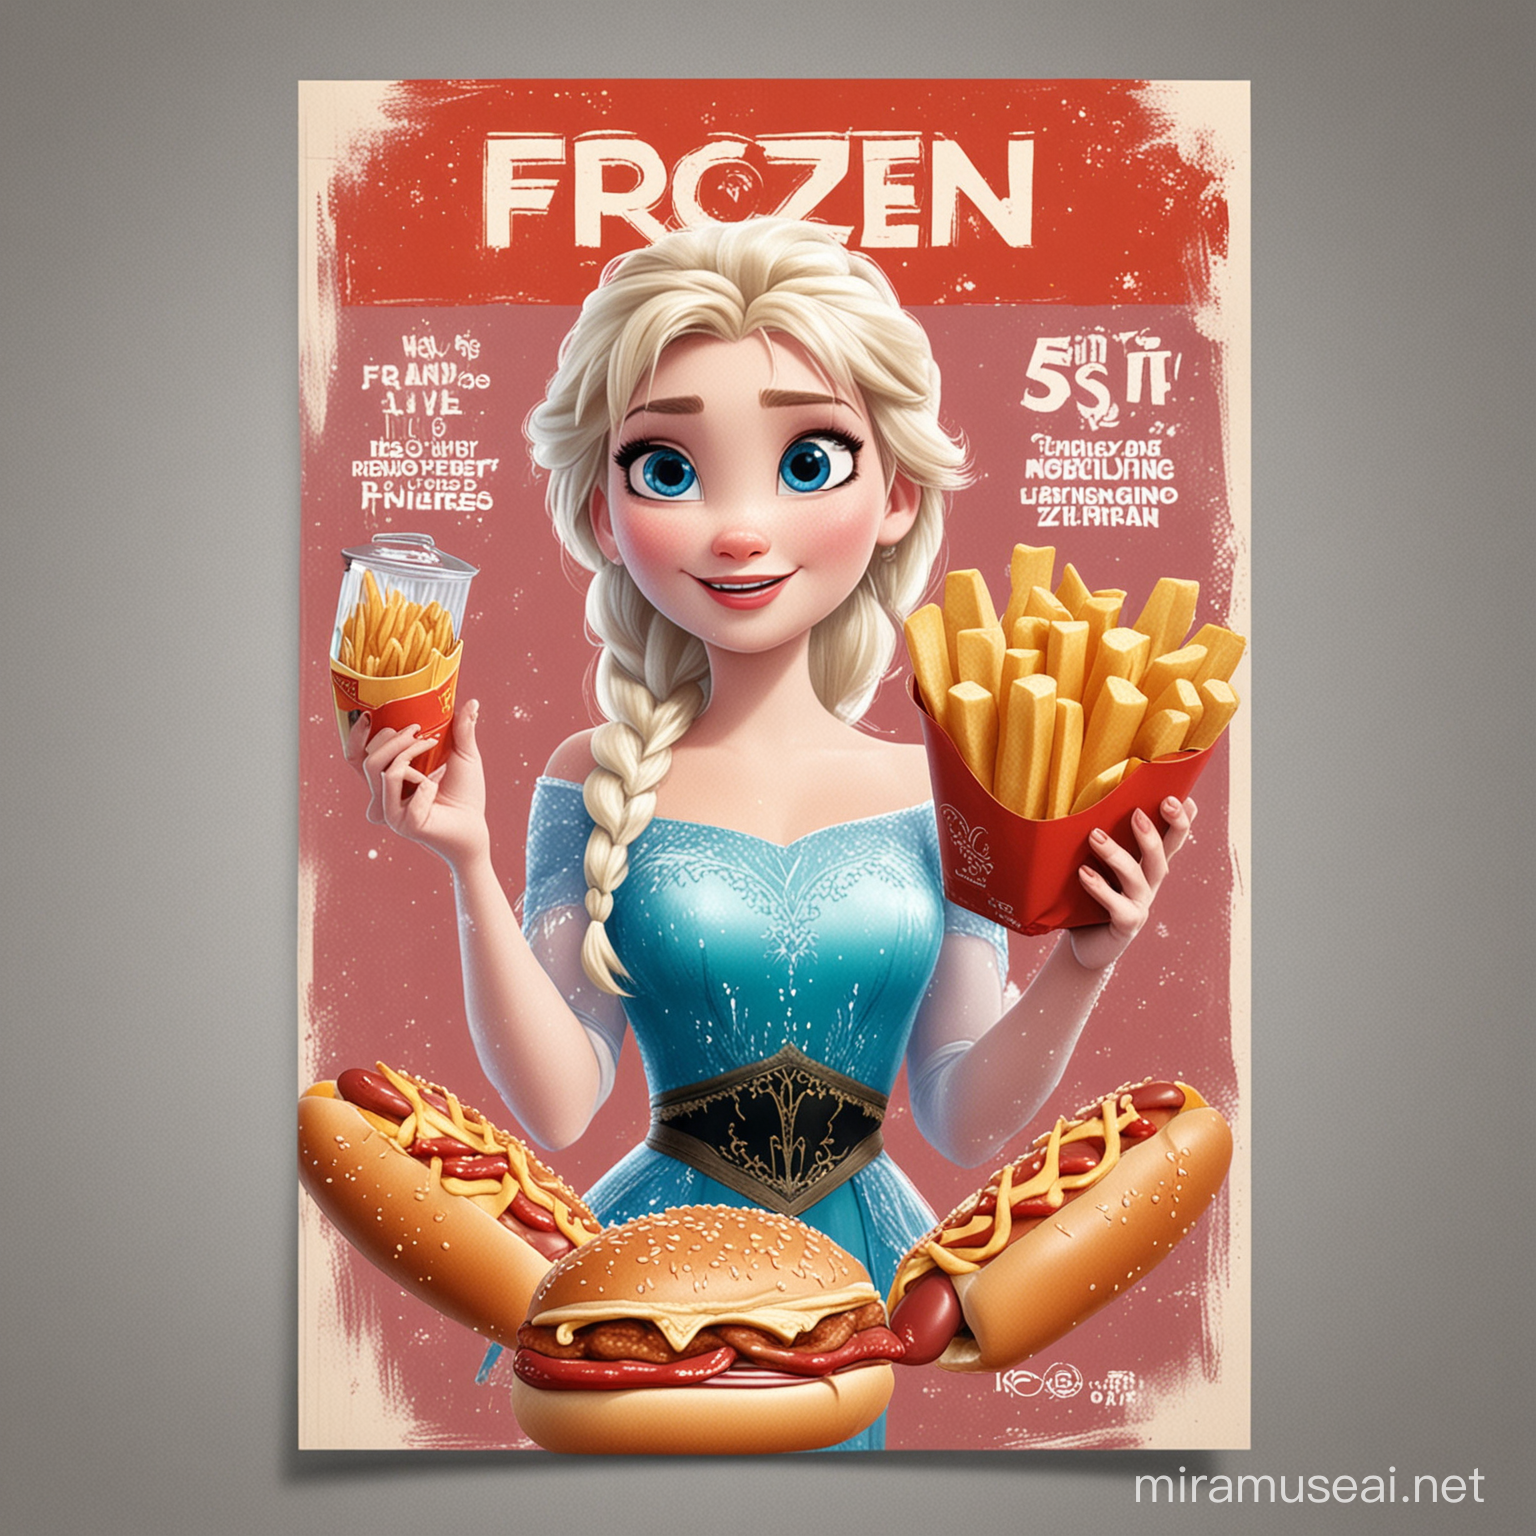 Elsa from Frozen Cartoon Poster with Comically Altered Props